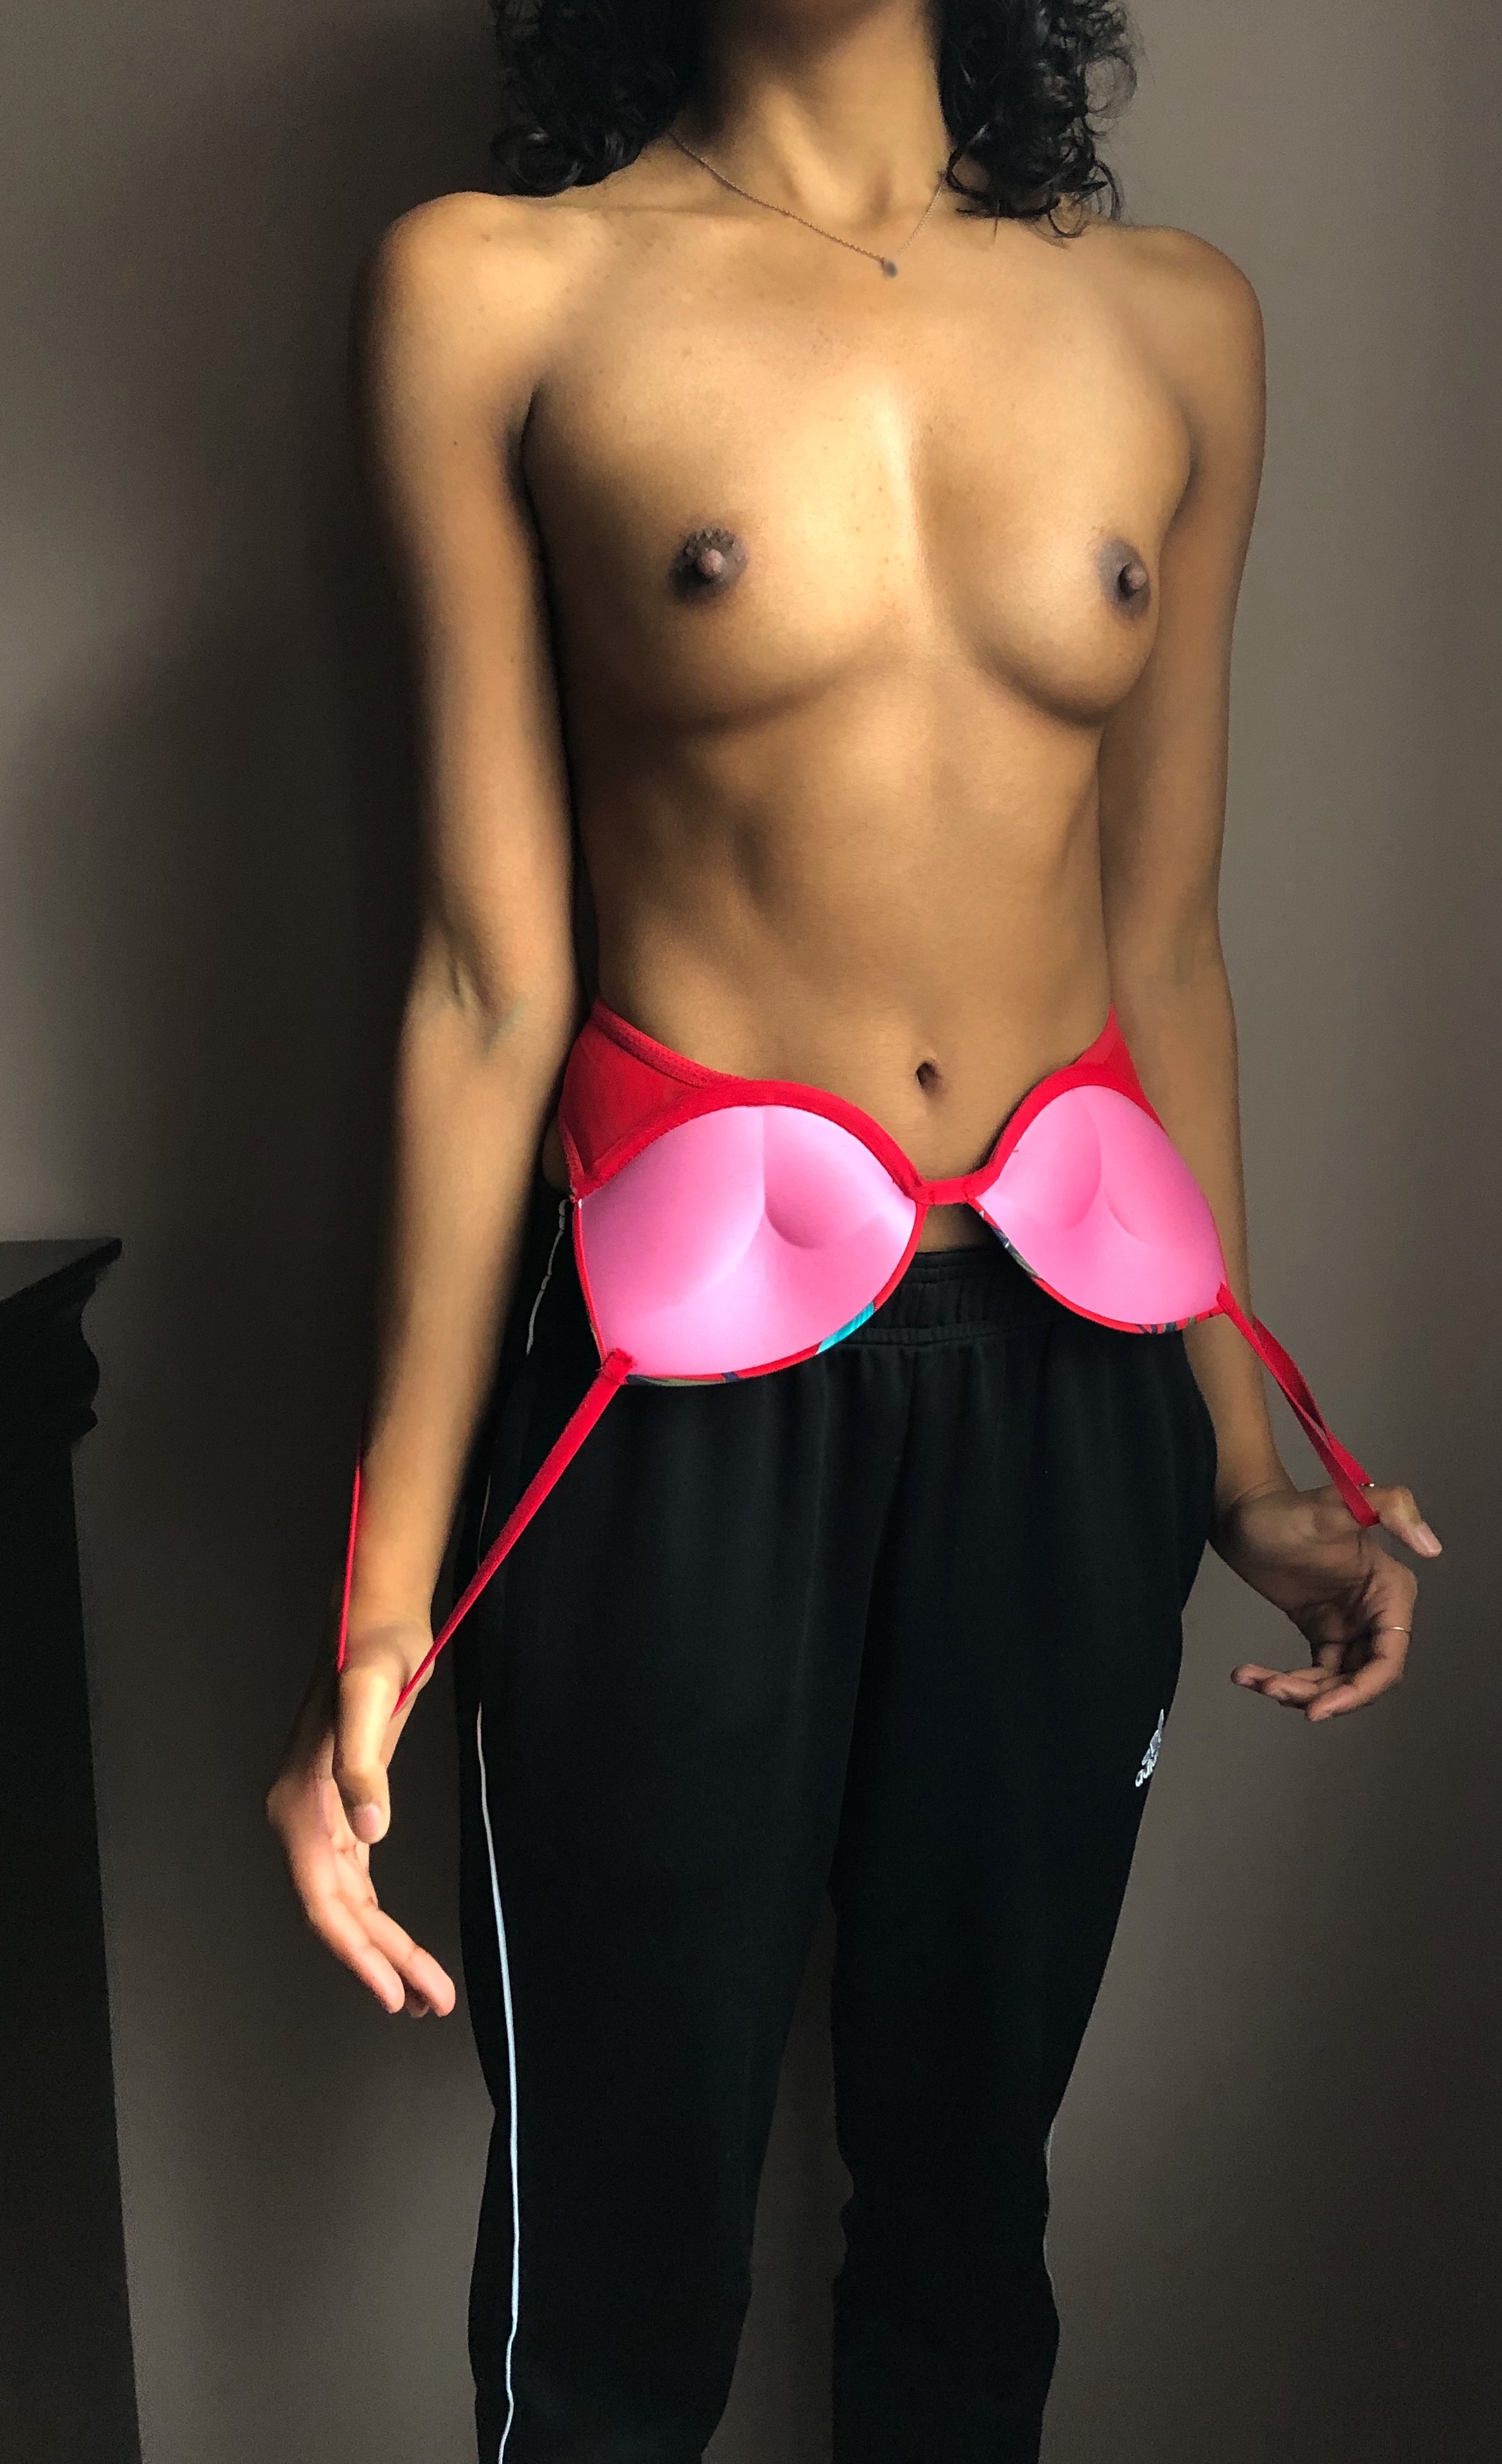 [F24] More of me topless, since you guys and gals asked :)